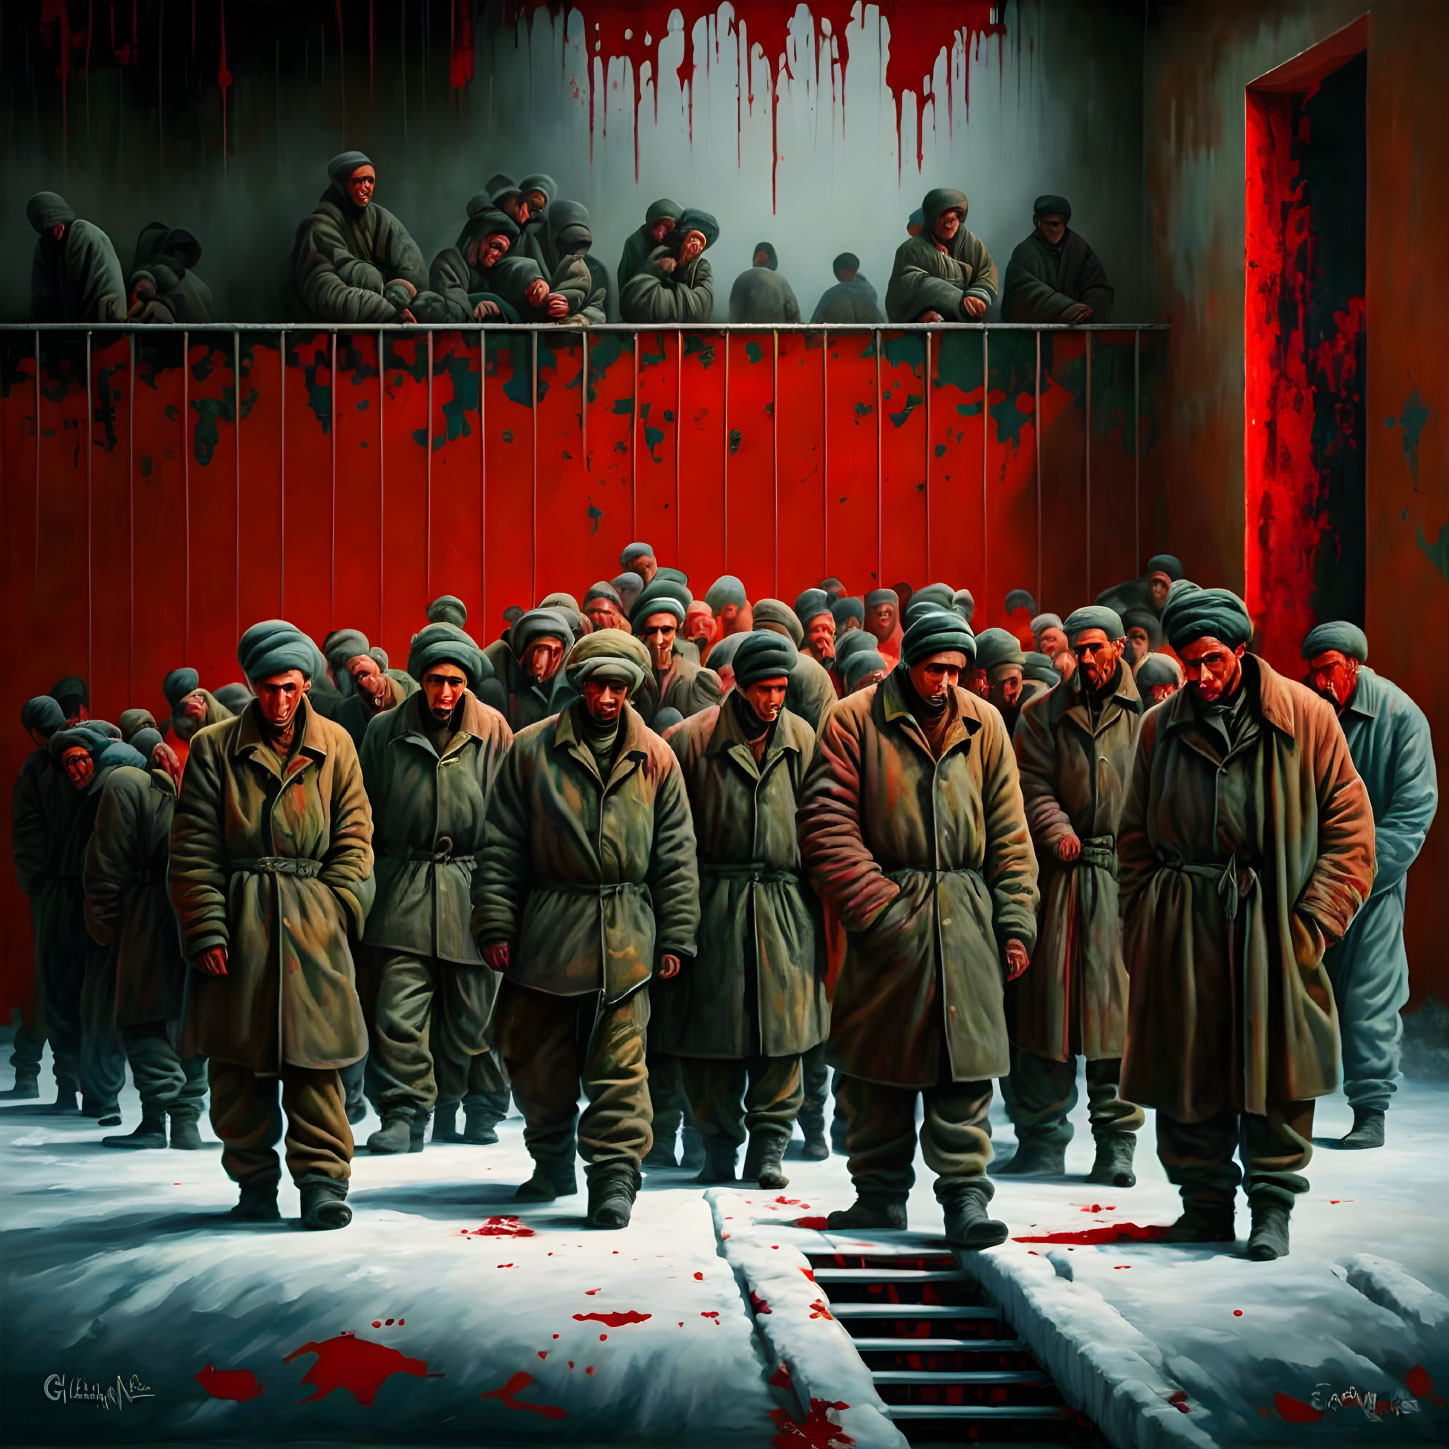 Solemn figures in uniforms march in a red-hued snowy scene